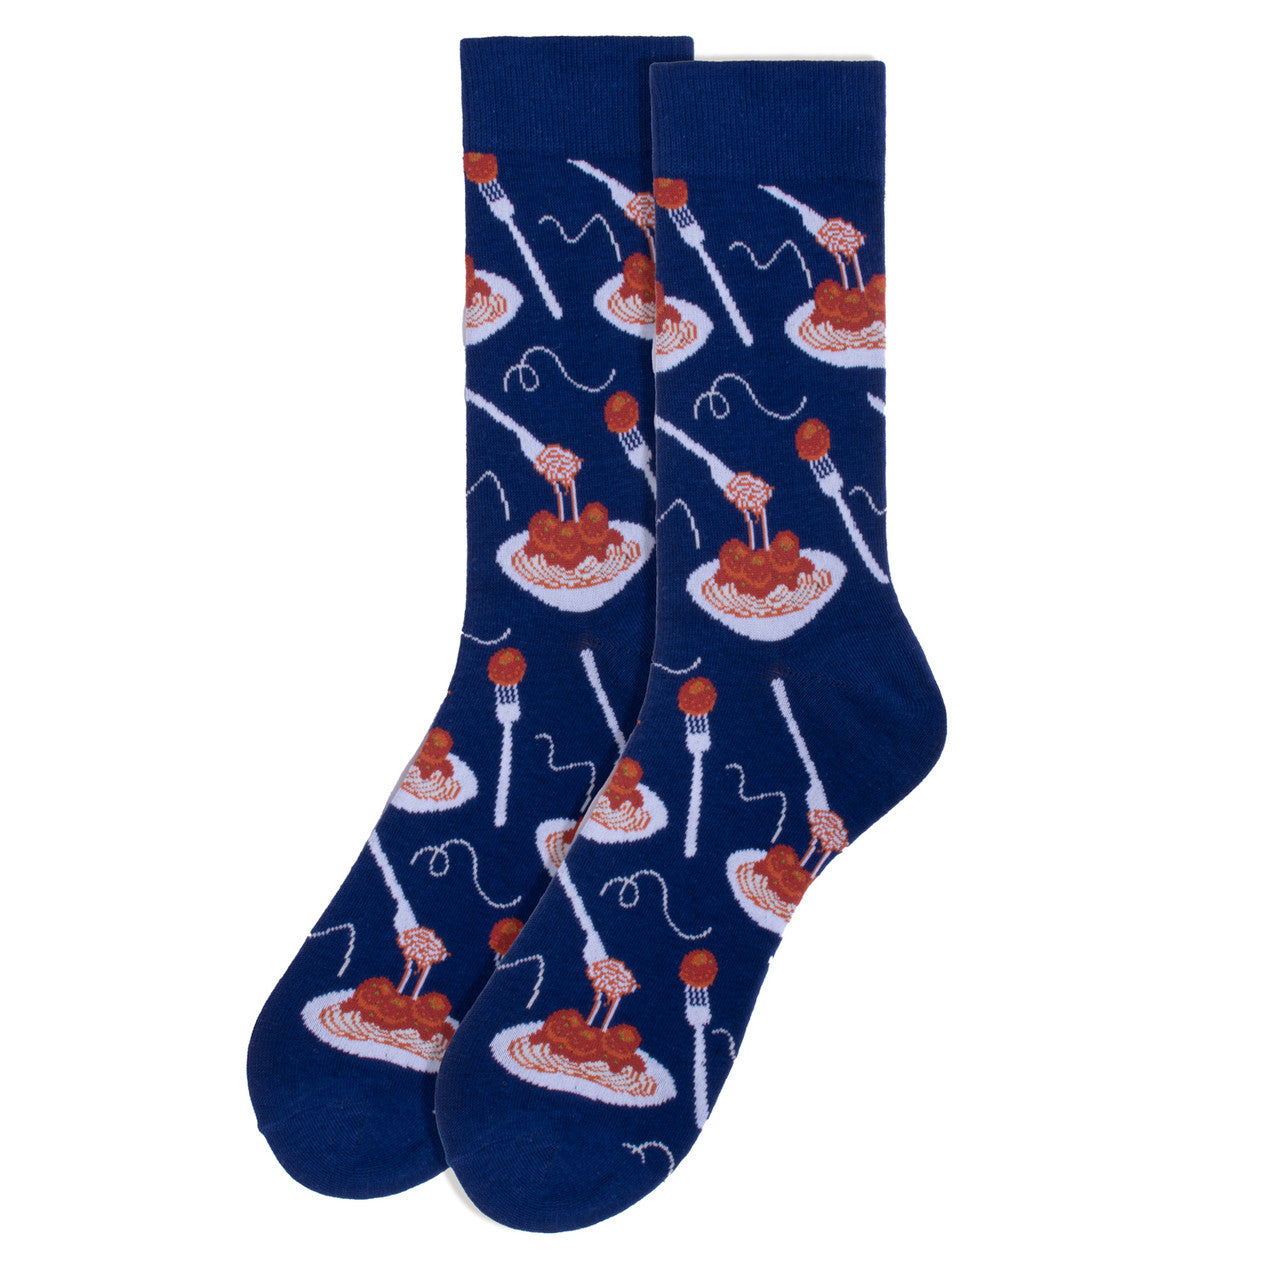 Men's Spaghetti and Meatball Crew Socks - Perfect for Sunday Dinners!